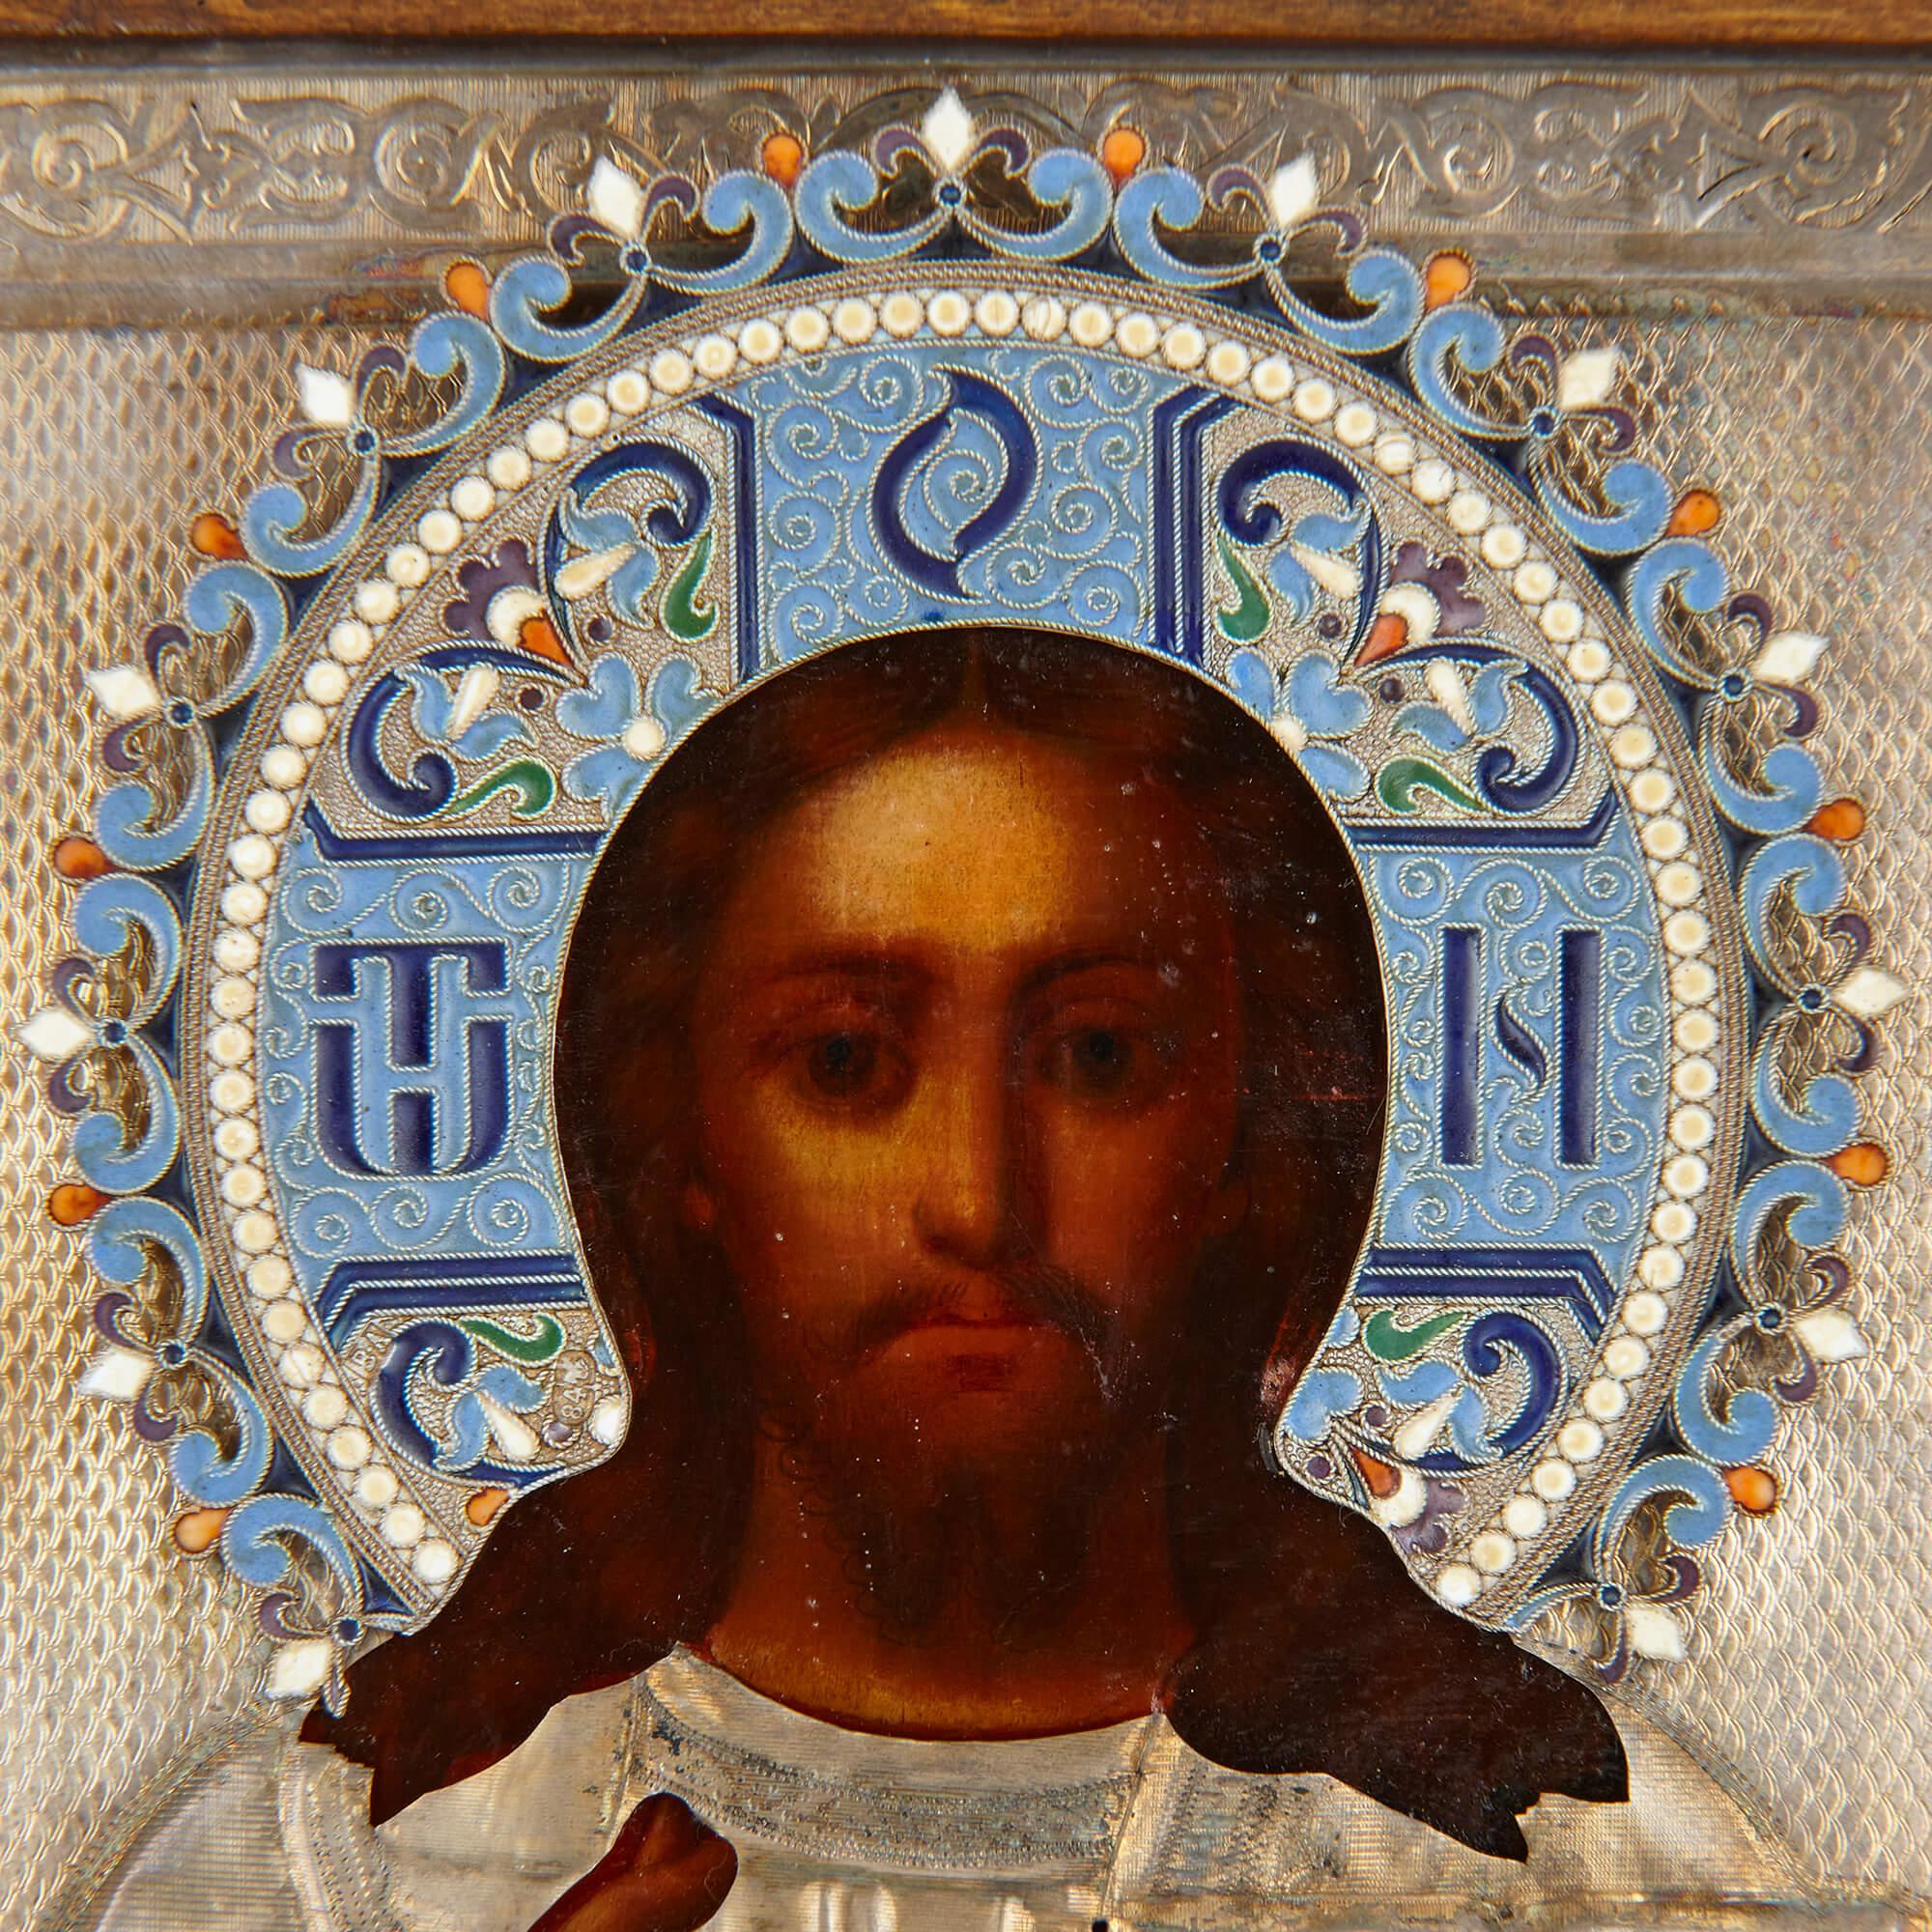 Christ Pantocrator, A silver-gilt and cloisonné Enamel Russian Icon
Moscow, 1892
Icon: 23.5cm high x 20cm wide x 4cm depth.
Case: 26.5cm high x 23cm wide x 7cm depth.

This exceptional piece is a silver and enamel Russian Icon depicting Christ